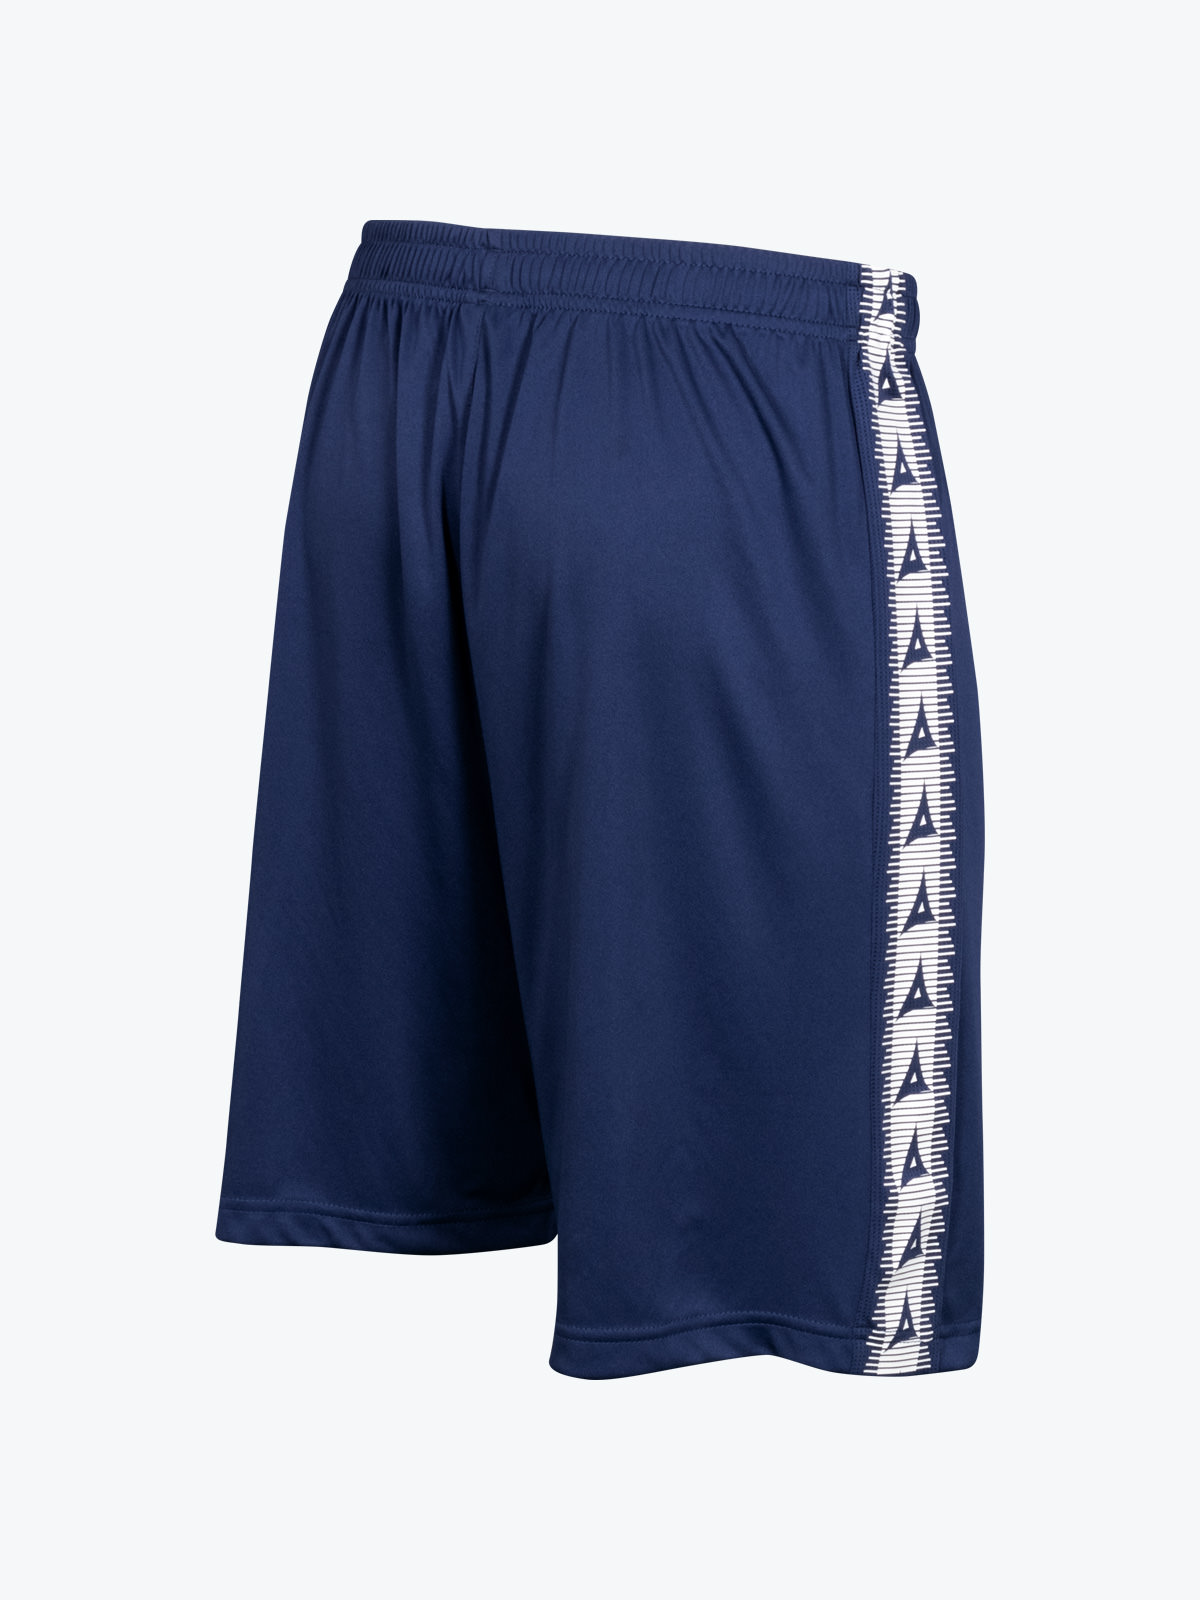 picture of evolve short - navy